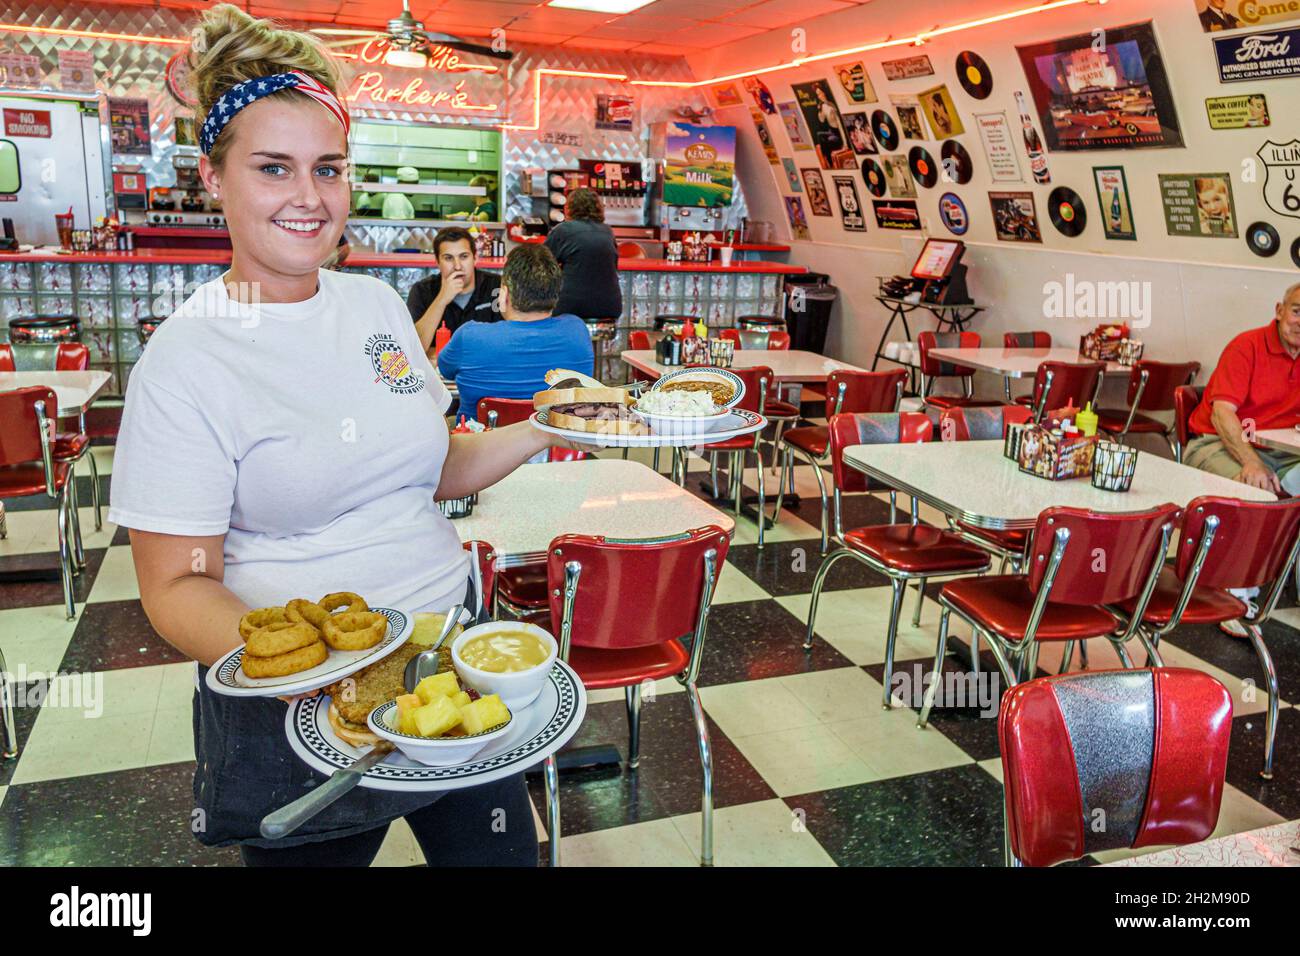 Springfield Illinois,Historic Route 66,Charlie Parker's Diner,restaurant inside interior woman female,waitress server food employee working staff Stock Photo